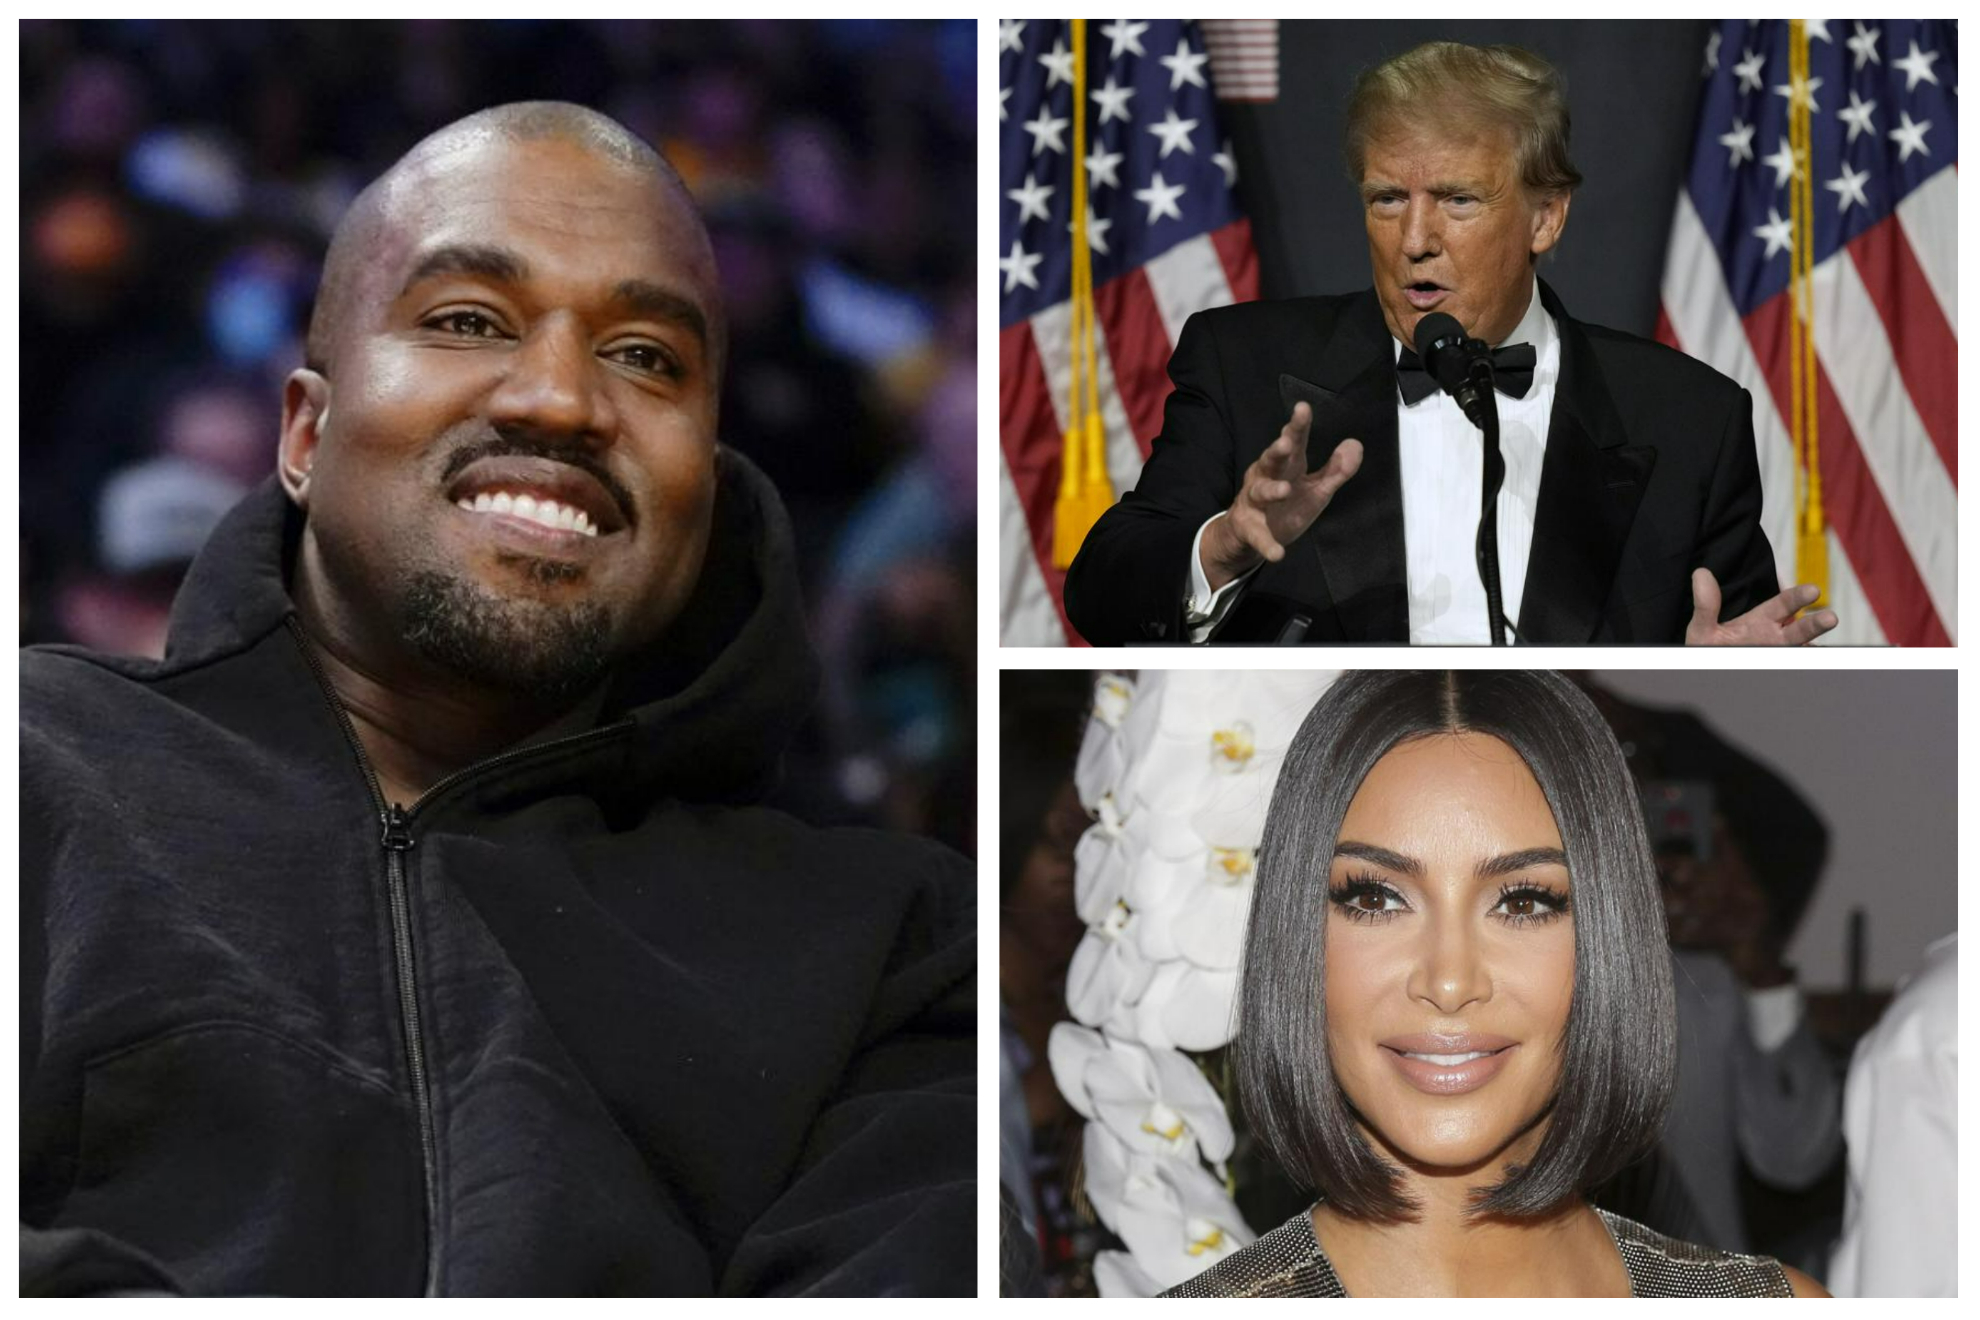 Kanye West talked about the isults that Donald Trump used to hurl at his former wife, Kim Kardashian.